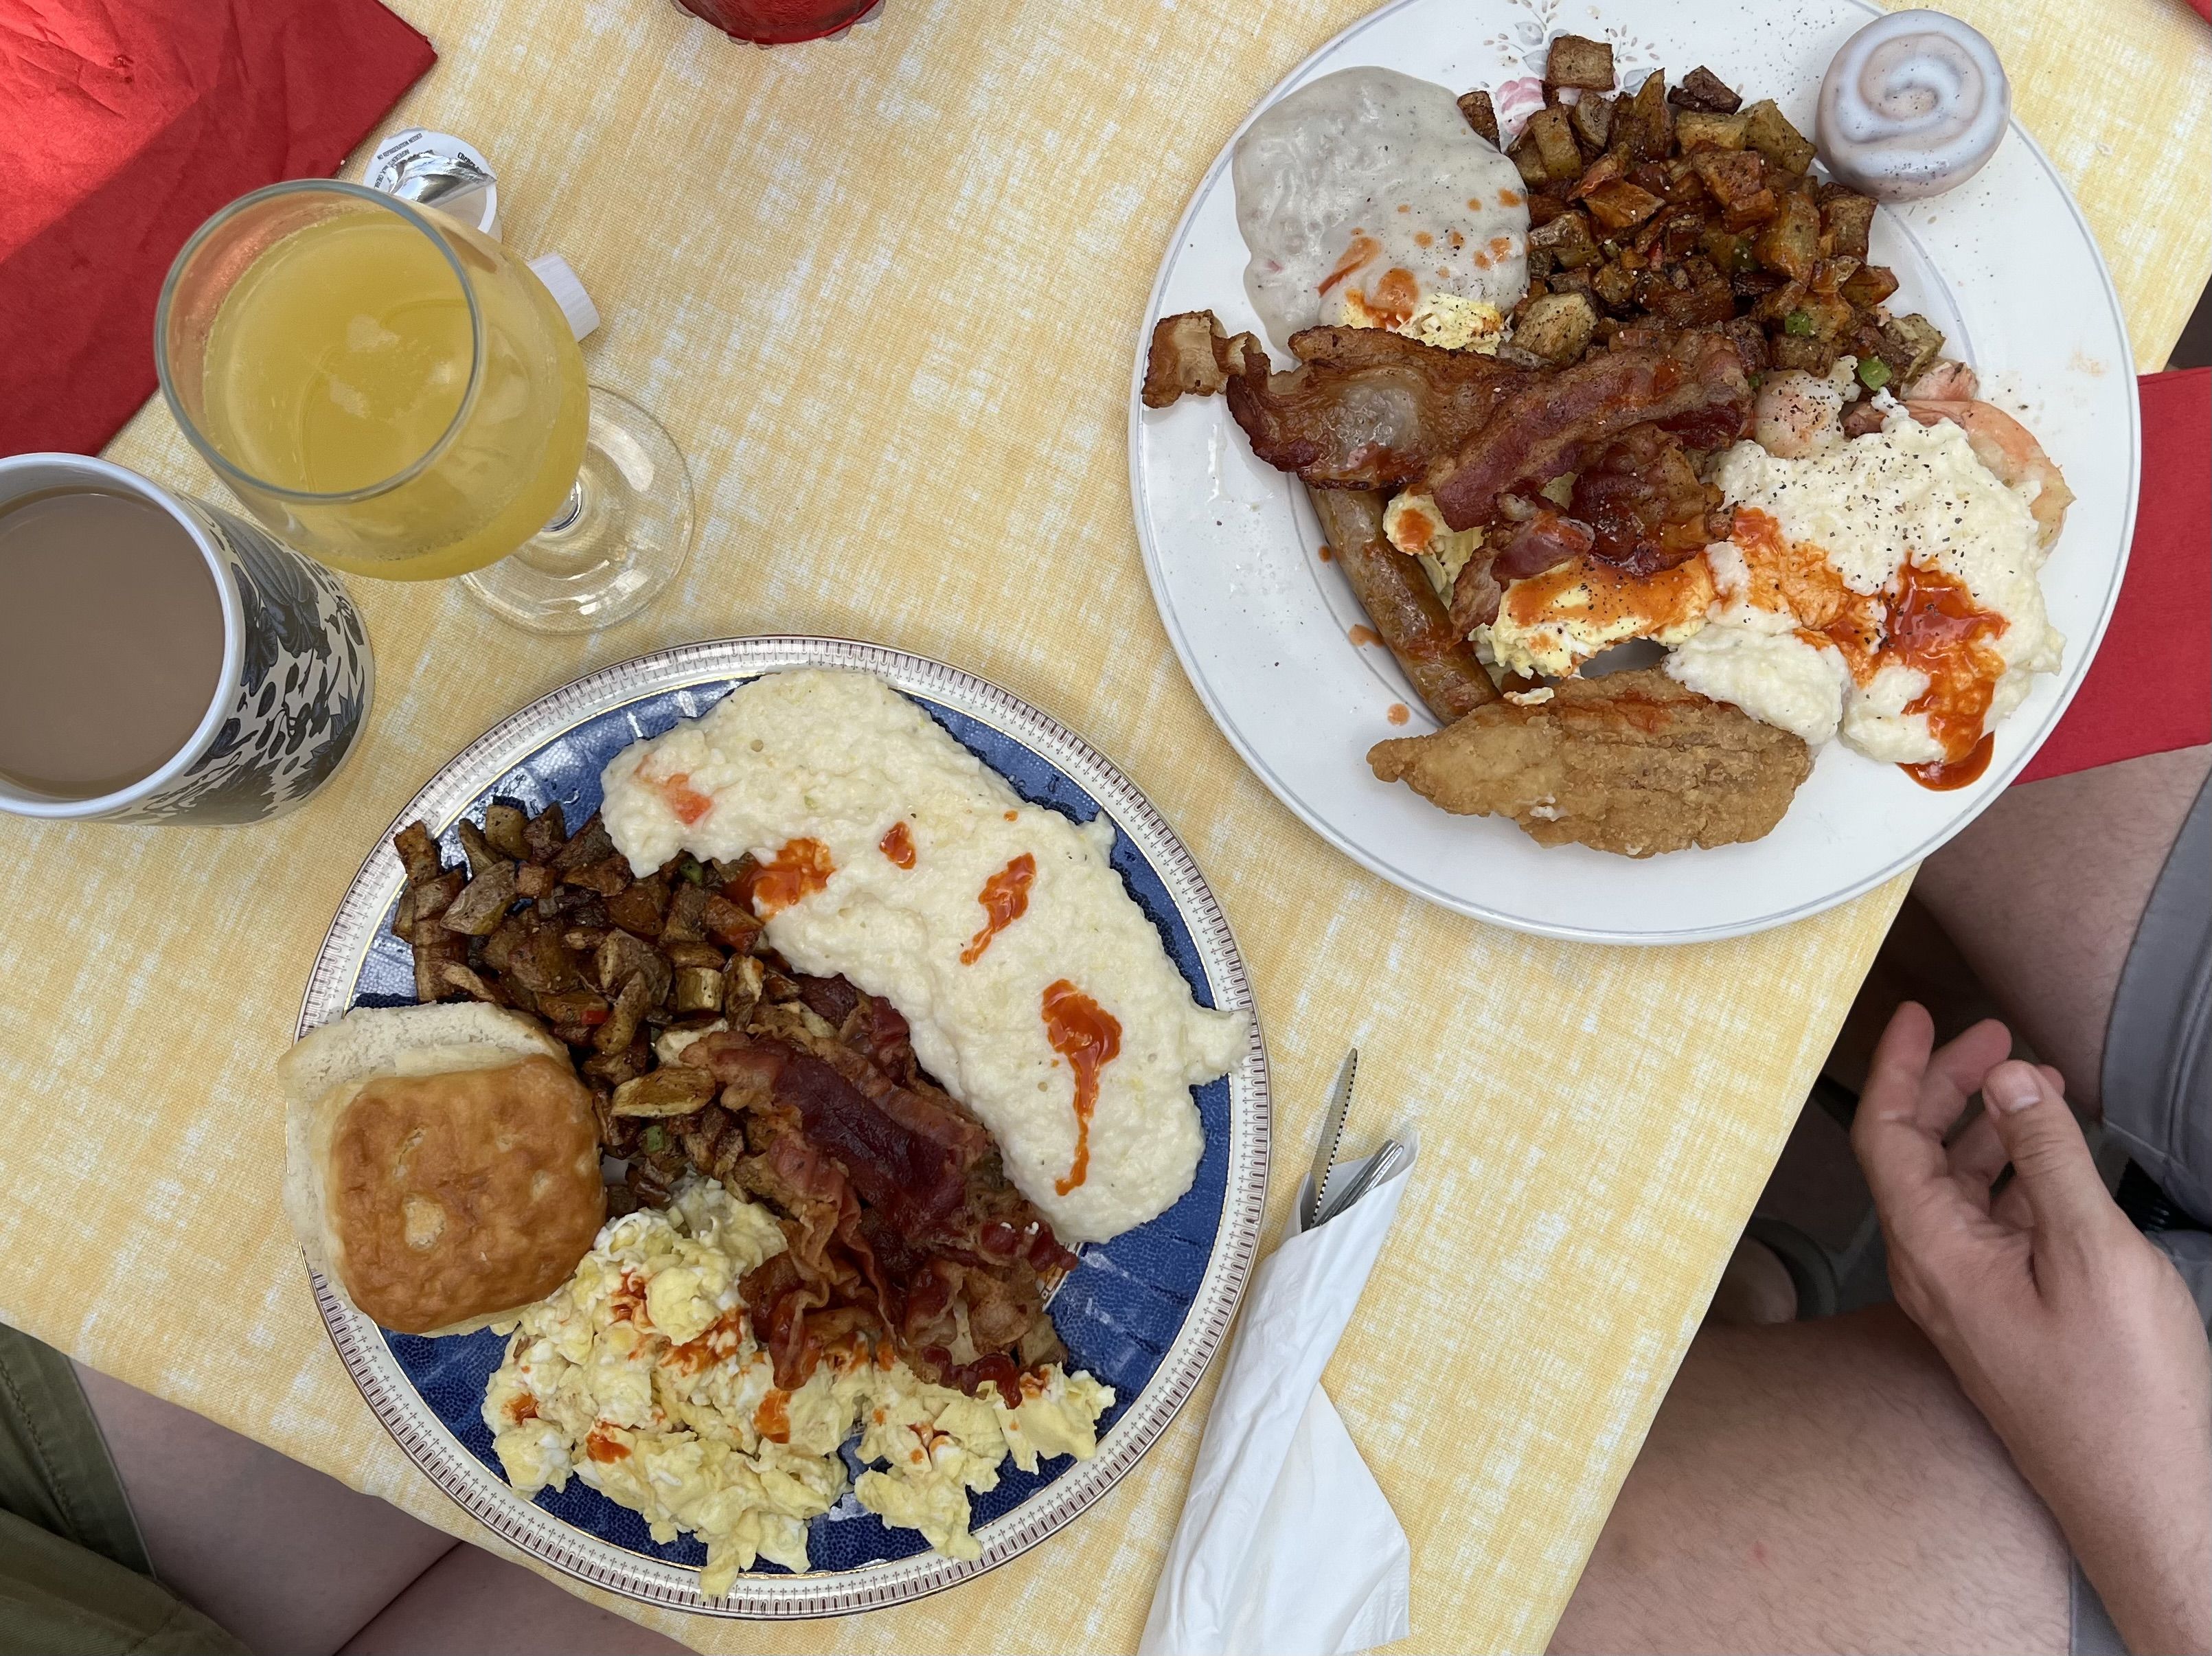 An overhead photo showing plates of food with grits, bacon, potatoes, fried chicken, biscuits and gravy.